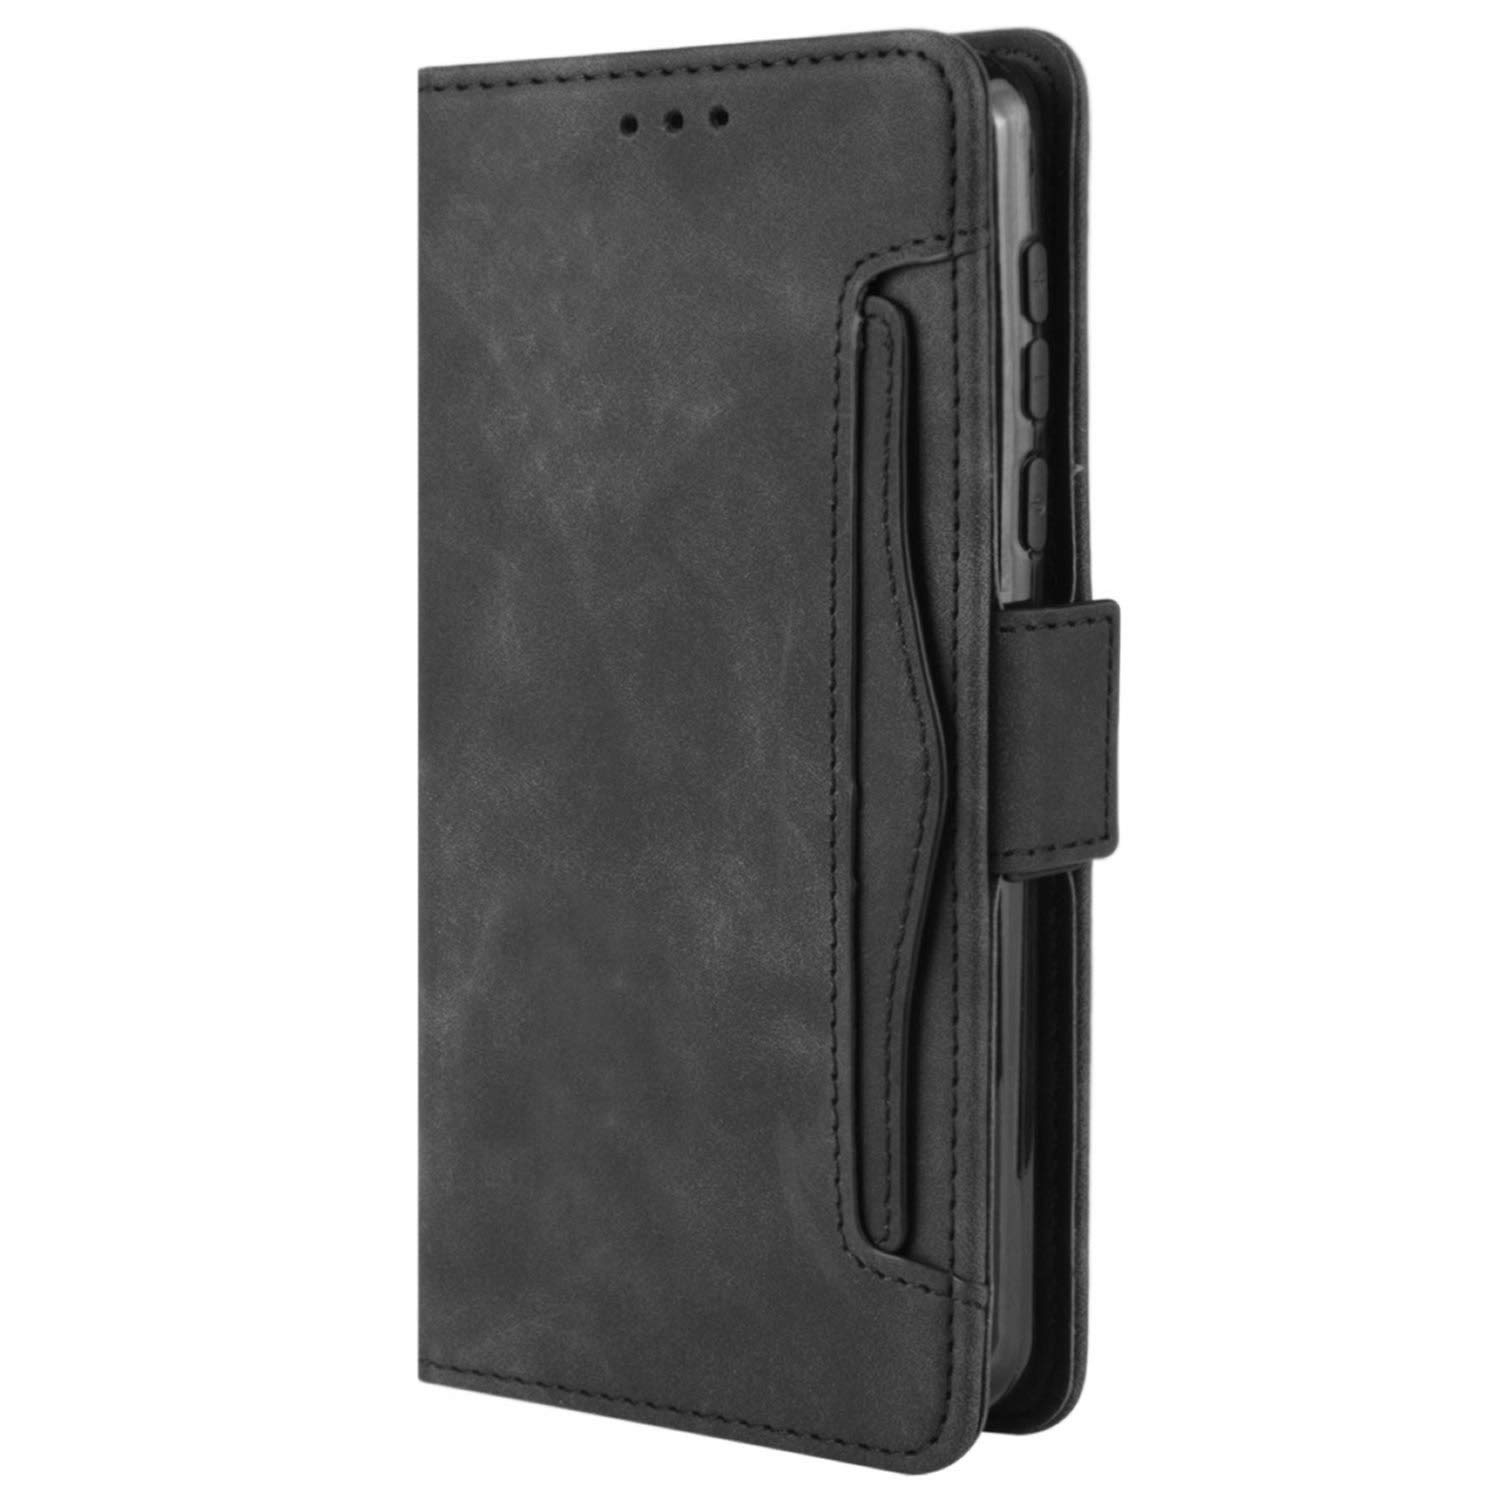 HualuBro Boost Mobile Celero 5G Plus Case, Magnetic Full Body Protection Shockproof Flip Leather Wallet Case Cover with Card Holder for Boost Mobile Celero 5G Plus / 5G+ Phone Case (Black)